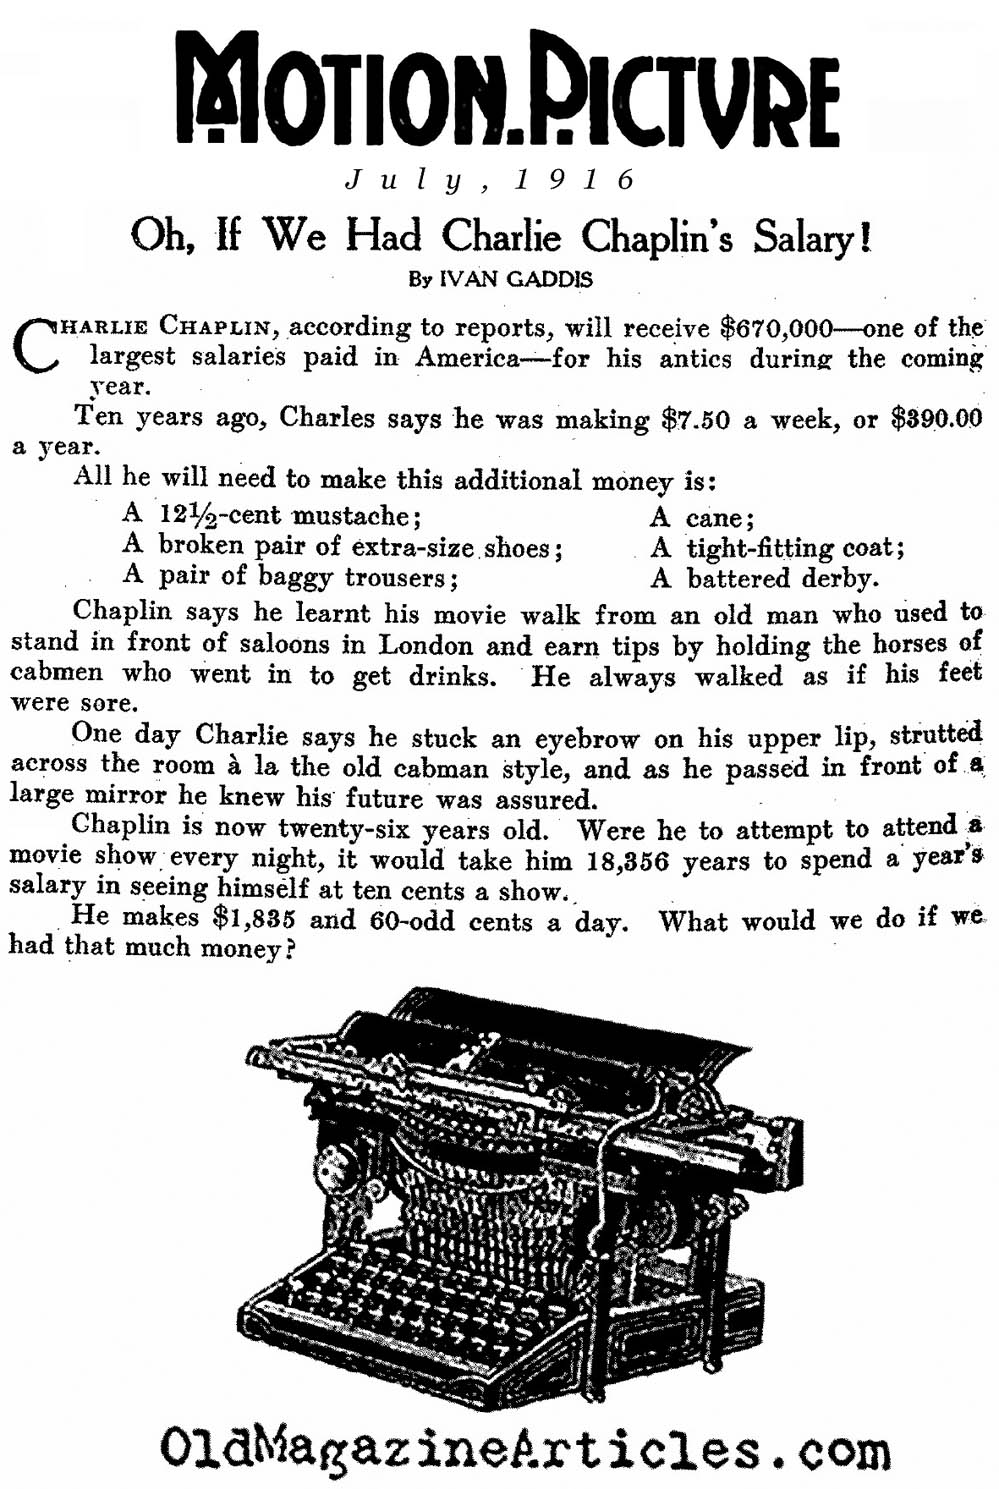 Charlie Chaplin's Salary and Other Concerns   (Motion Picture Magazine, 1916)